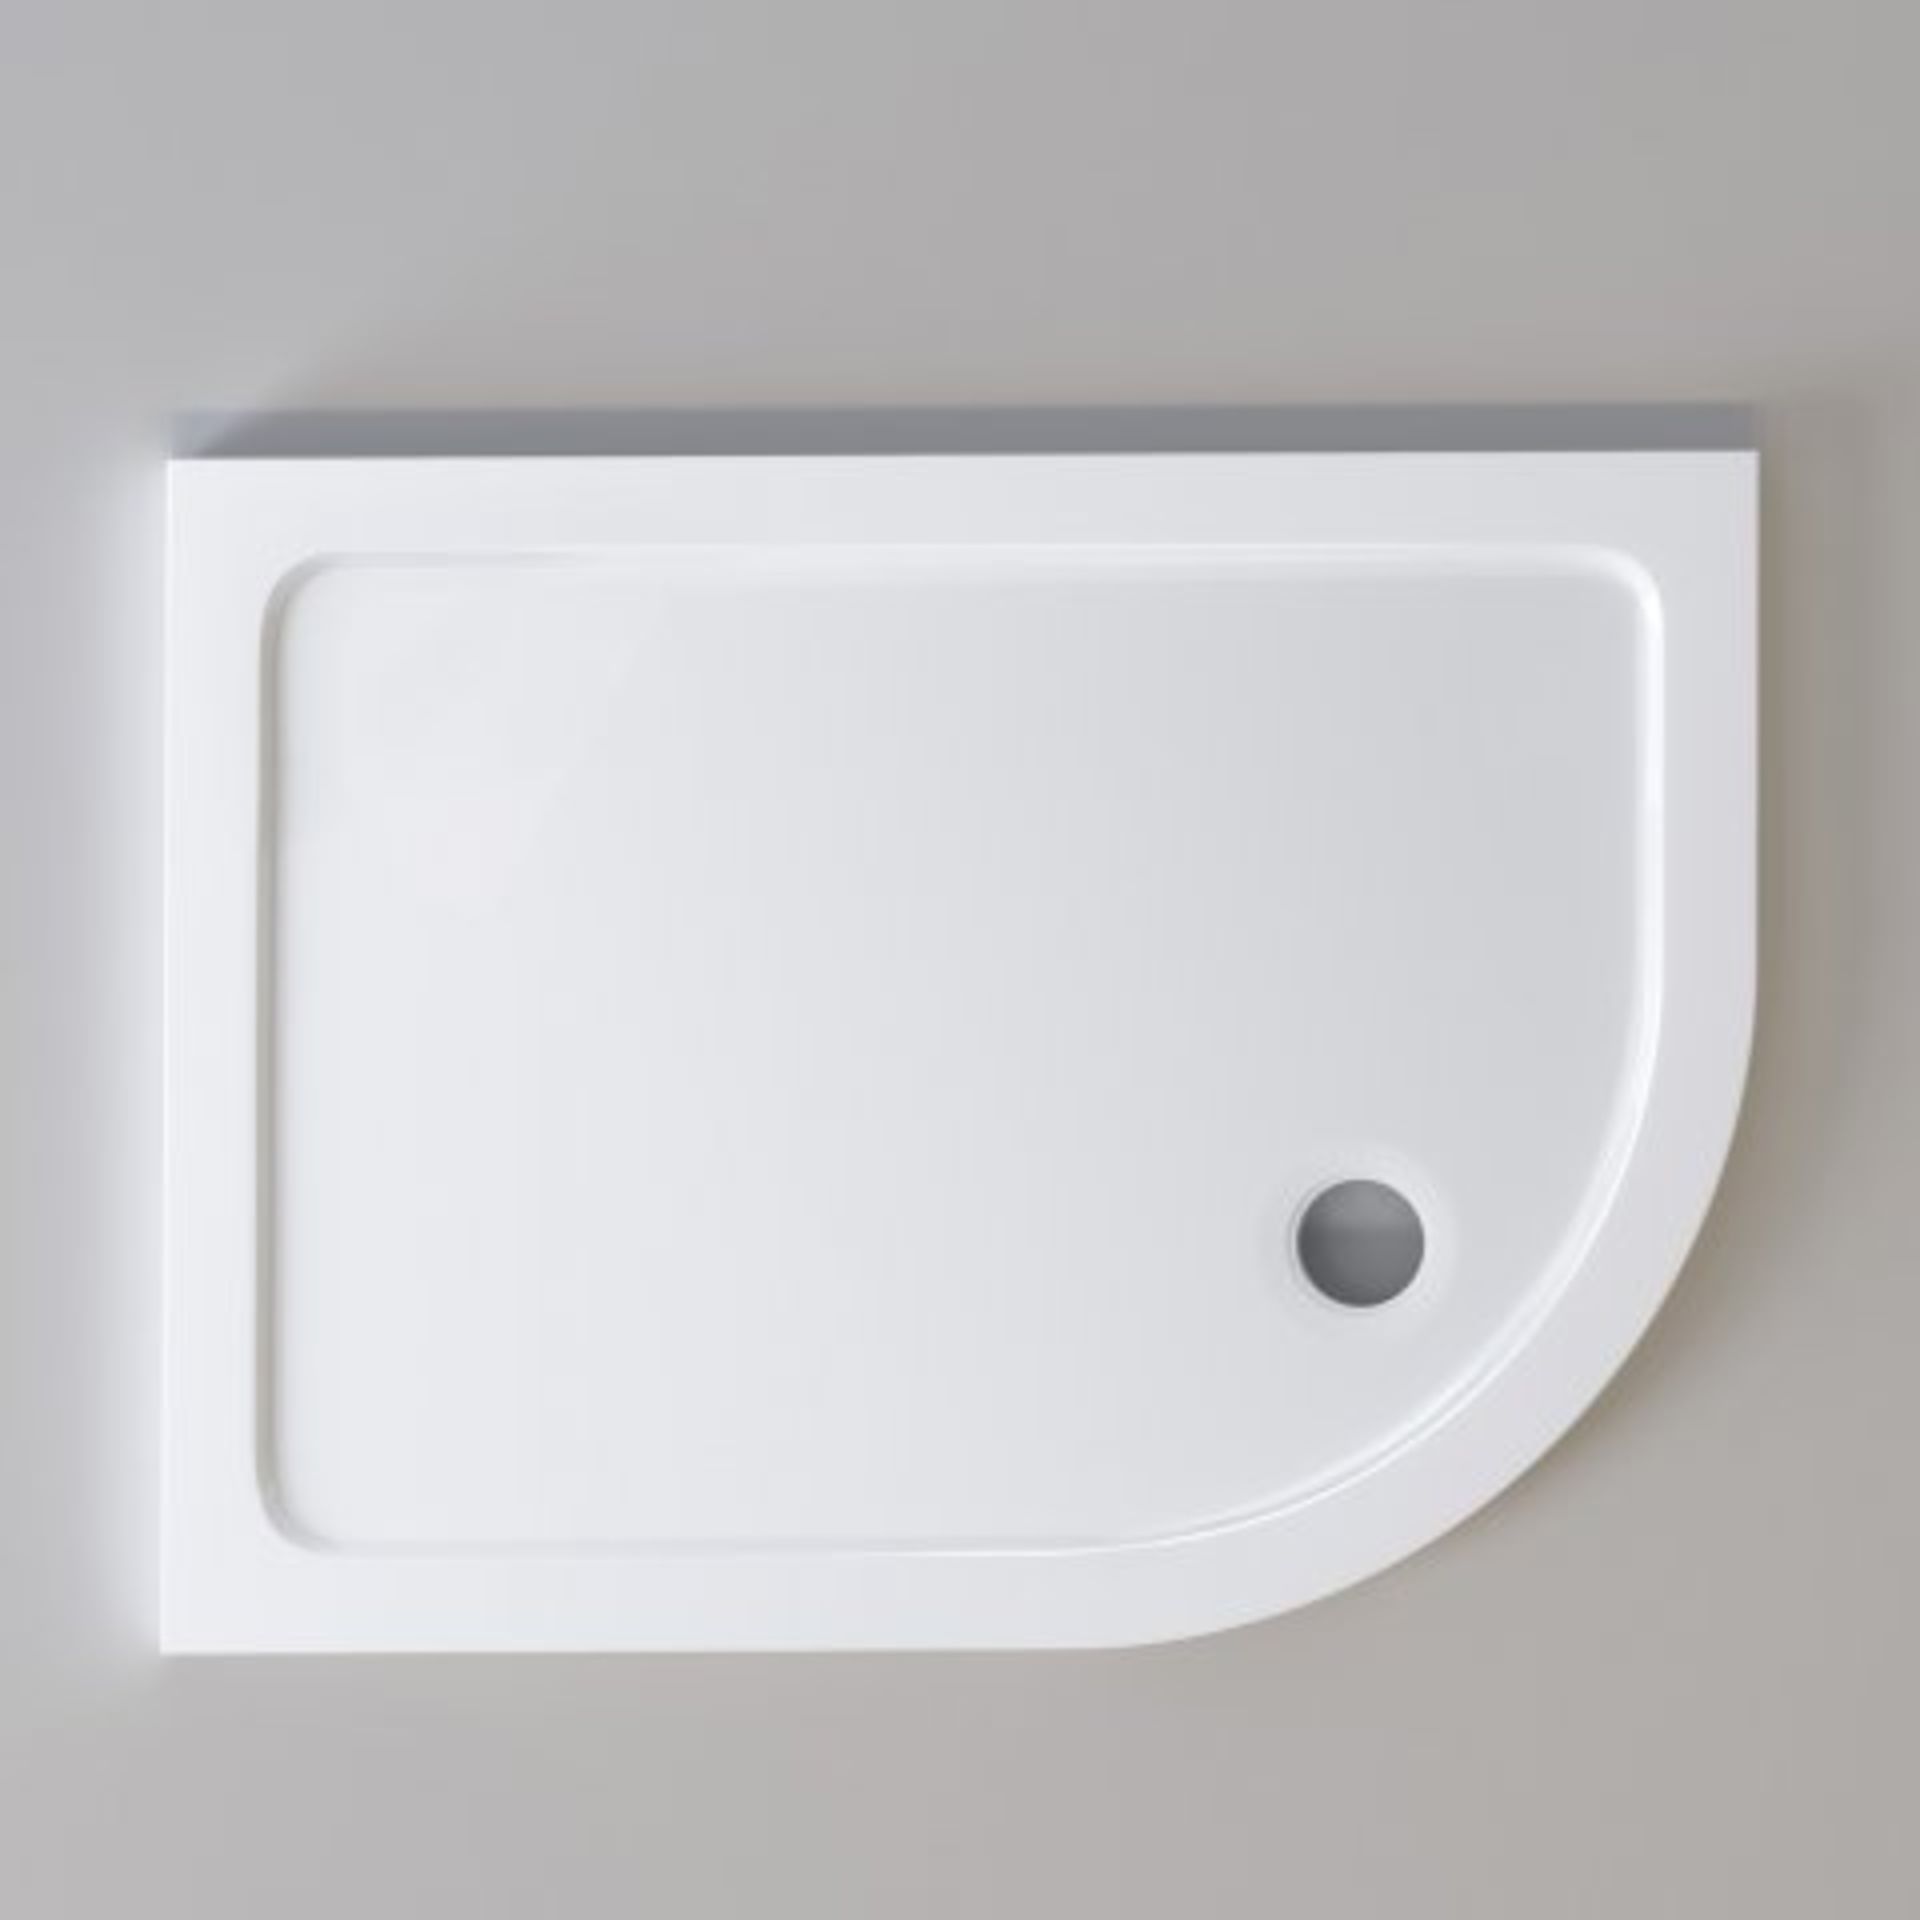 (T50) 1200x900mm Offset Quadrant Ultraslim Stone Shower Tray - Right. RRP £324.99. Magnificently - Image 2 of 2